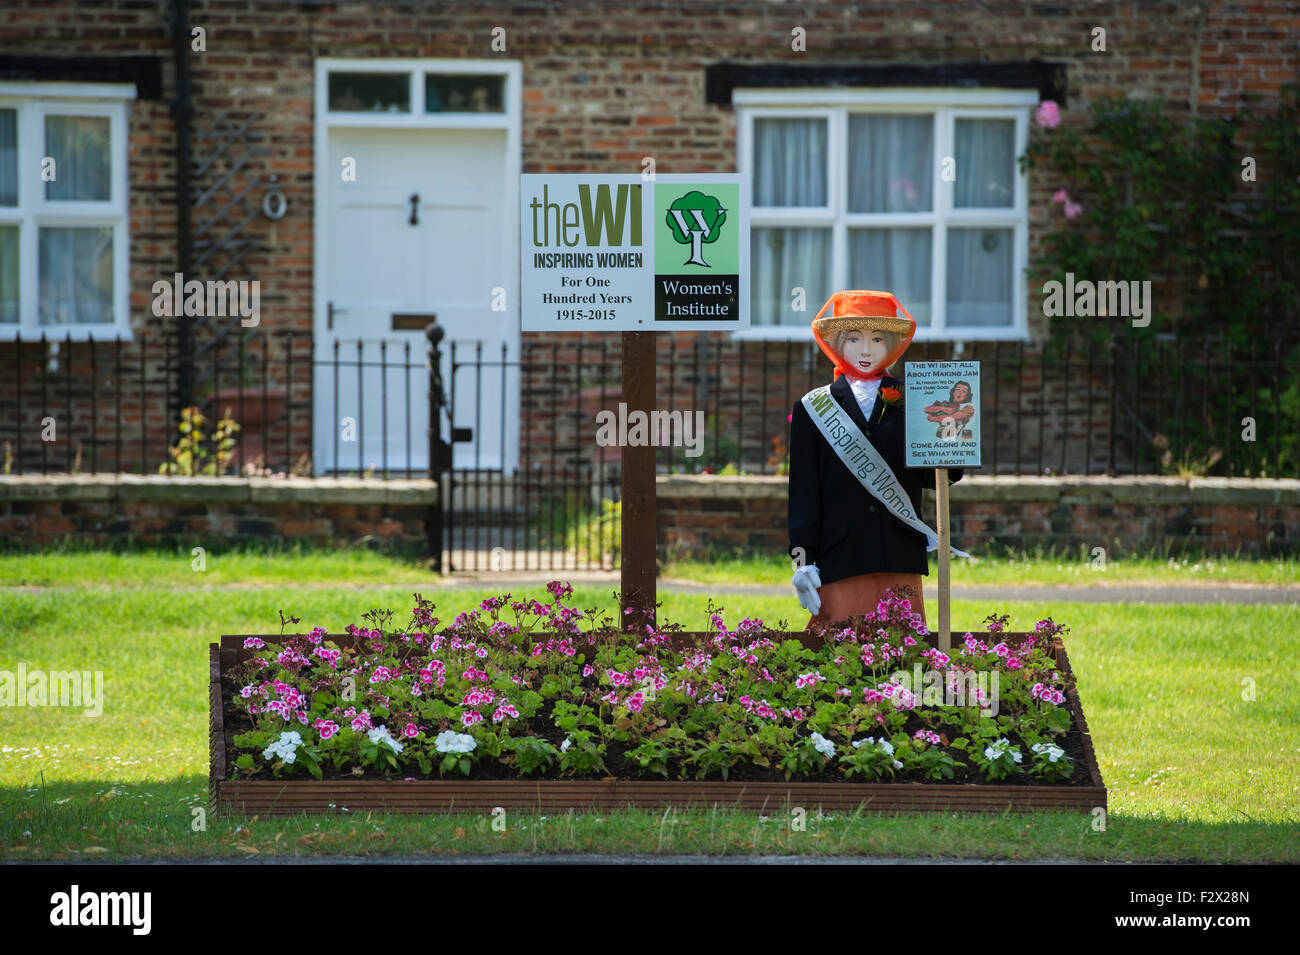 A scarecrow & floral display (raised bed of flowers) commemorate the centenary of The Women’s Institute (WI) - Upper Poppleton village, England, UK. Stock Photo